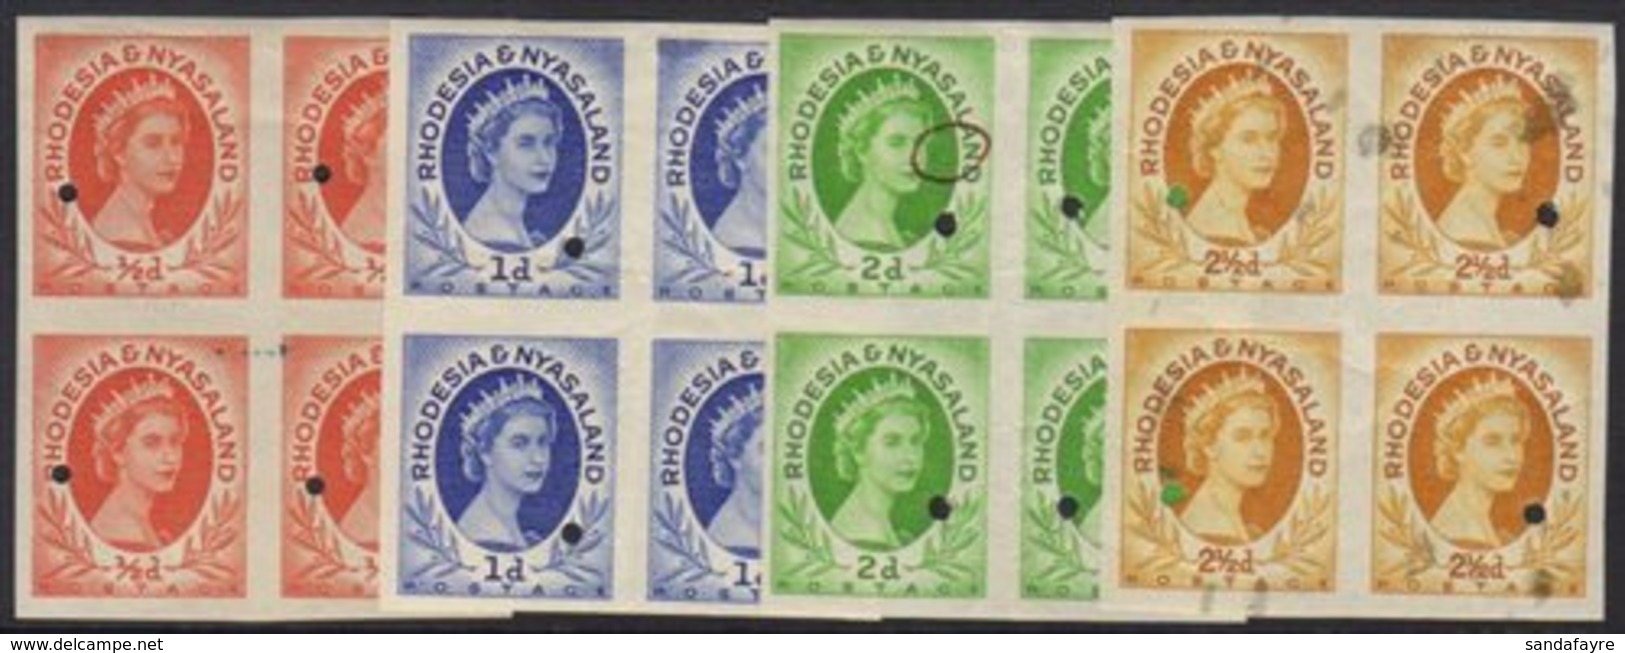 1954-56 Imperf Plate Proof Blocks Of Four ½d, 1d, 2d And 2½d, Mint Or Never Hinged Mint, With Archive Security Punch Hol - Rhodesia & Nyasaland (1954-1963)